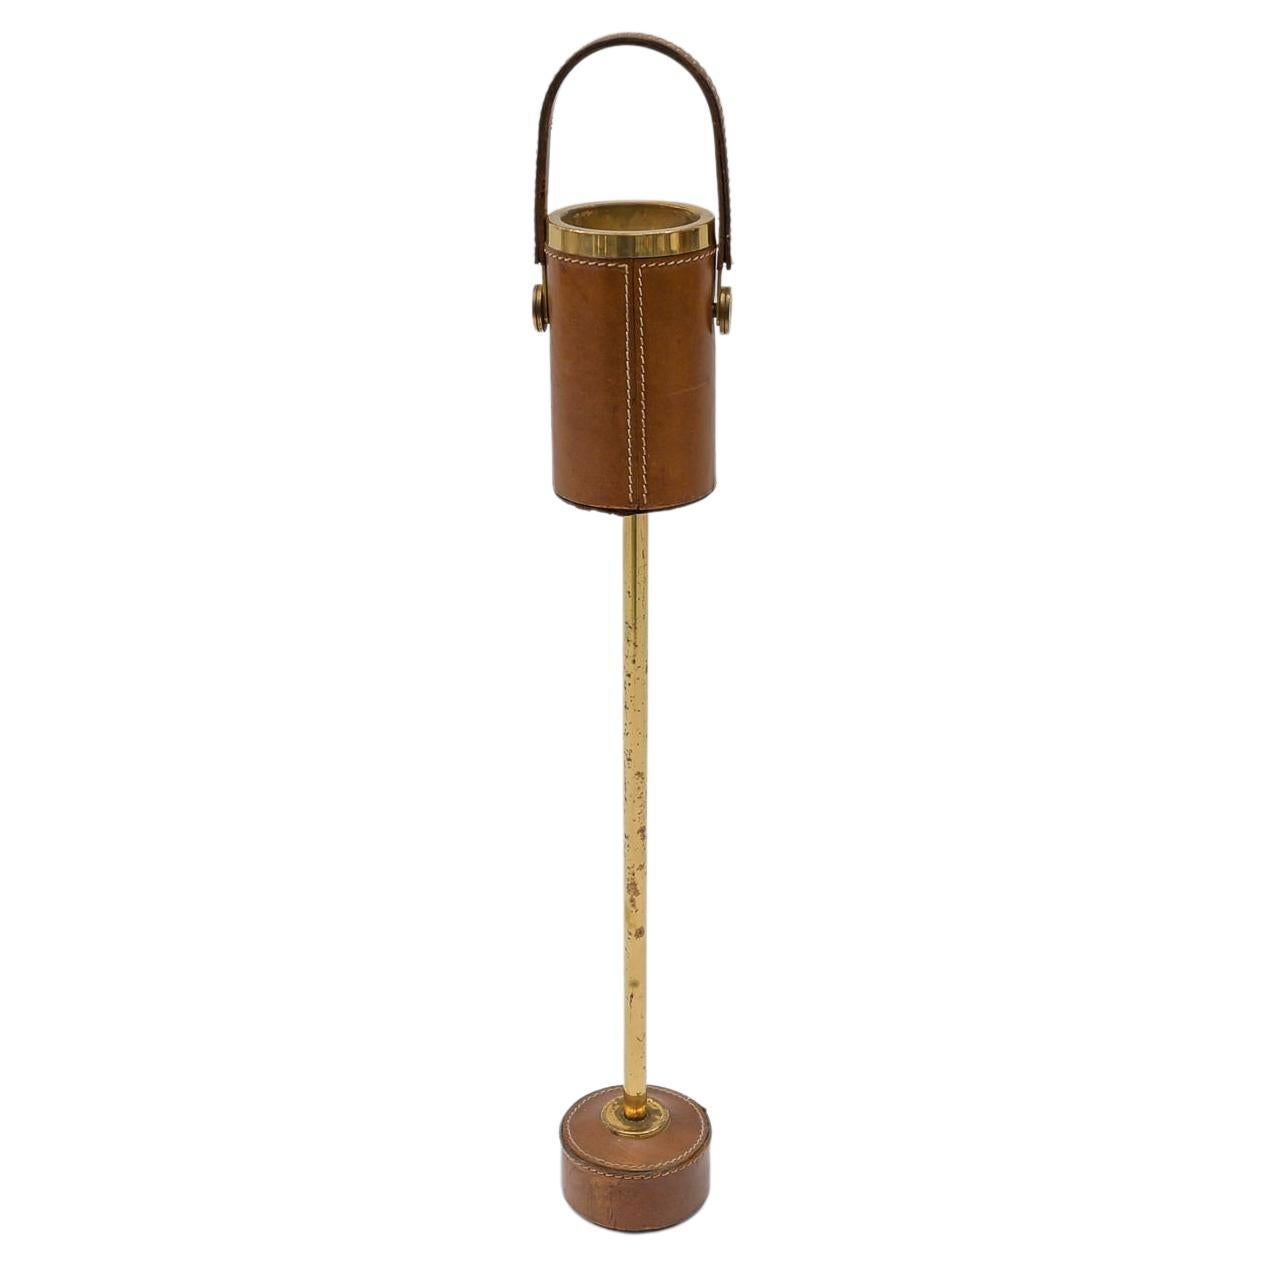 Portable Ashtray Stand in the Manner of Jacques Adnet, Brass and Leather, 1950s For Sale